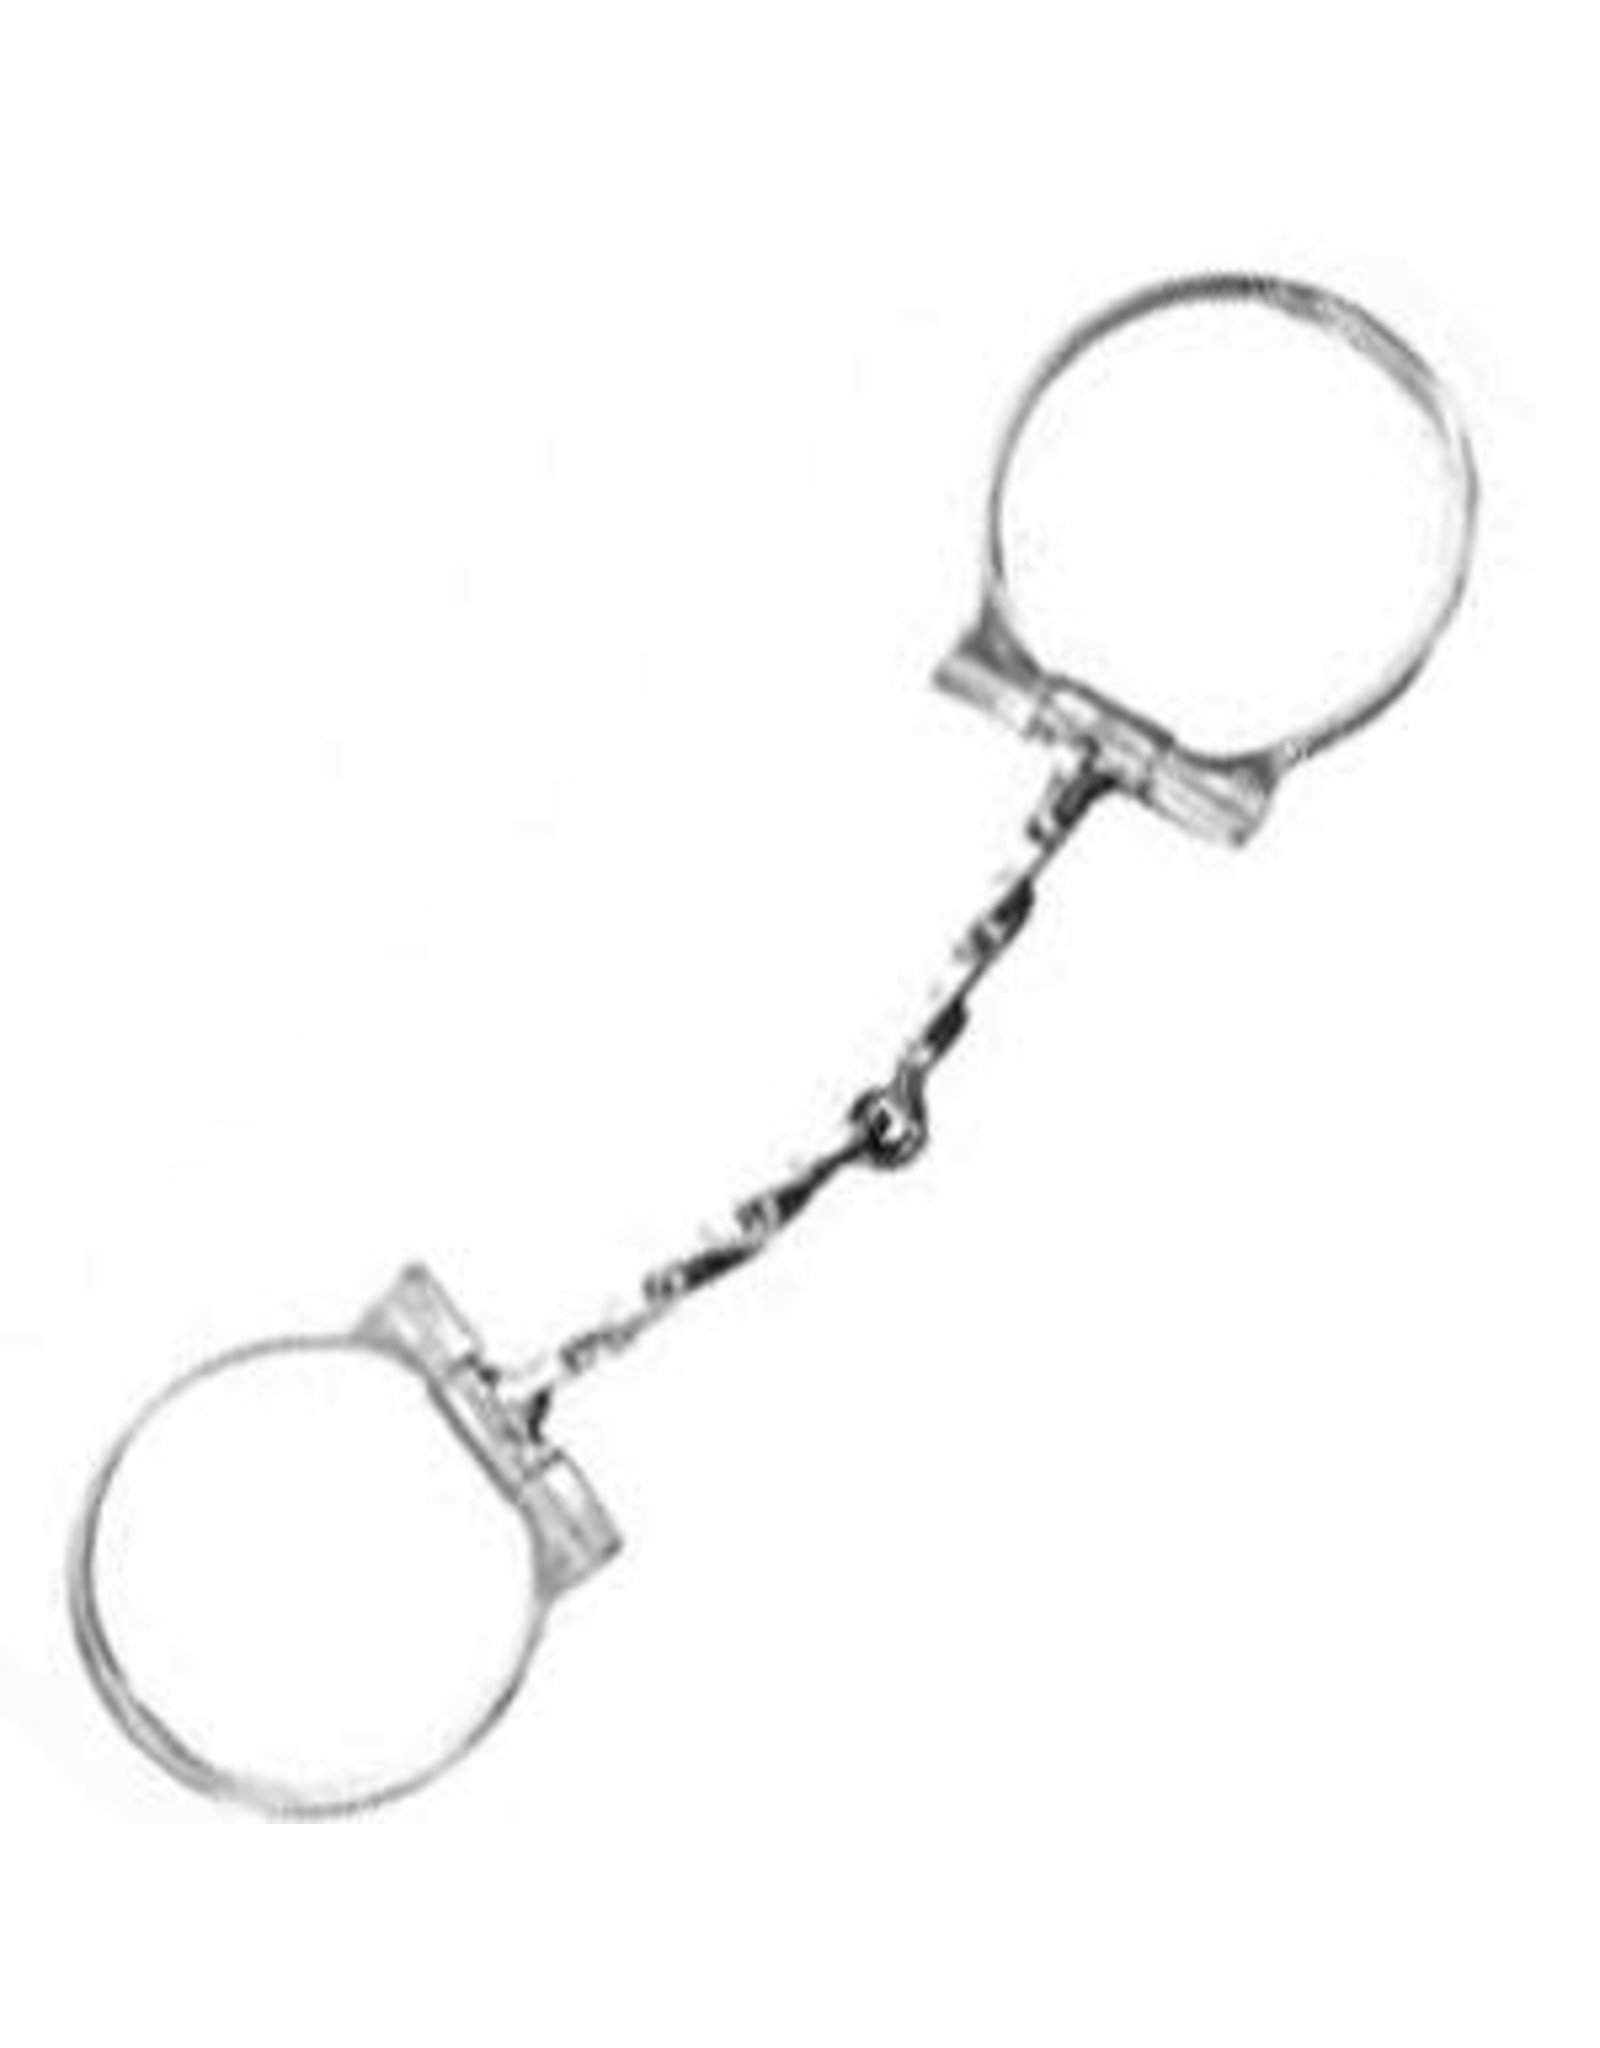 Partrade D-Ring Twisted Snaffle Bit 257337